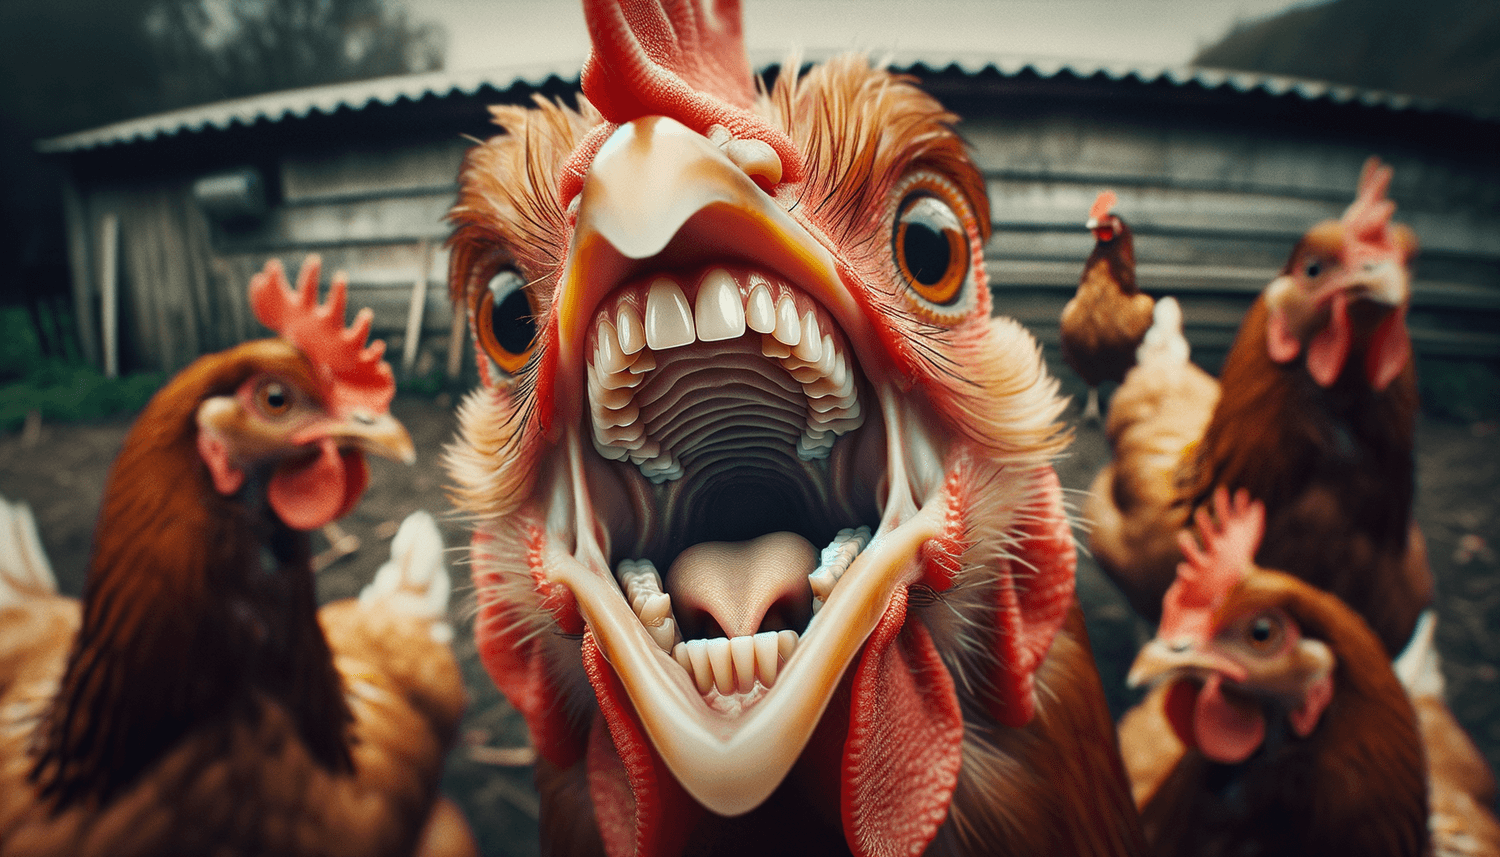 Do Chickens Have Teeth?